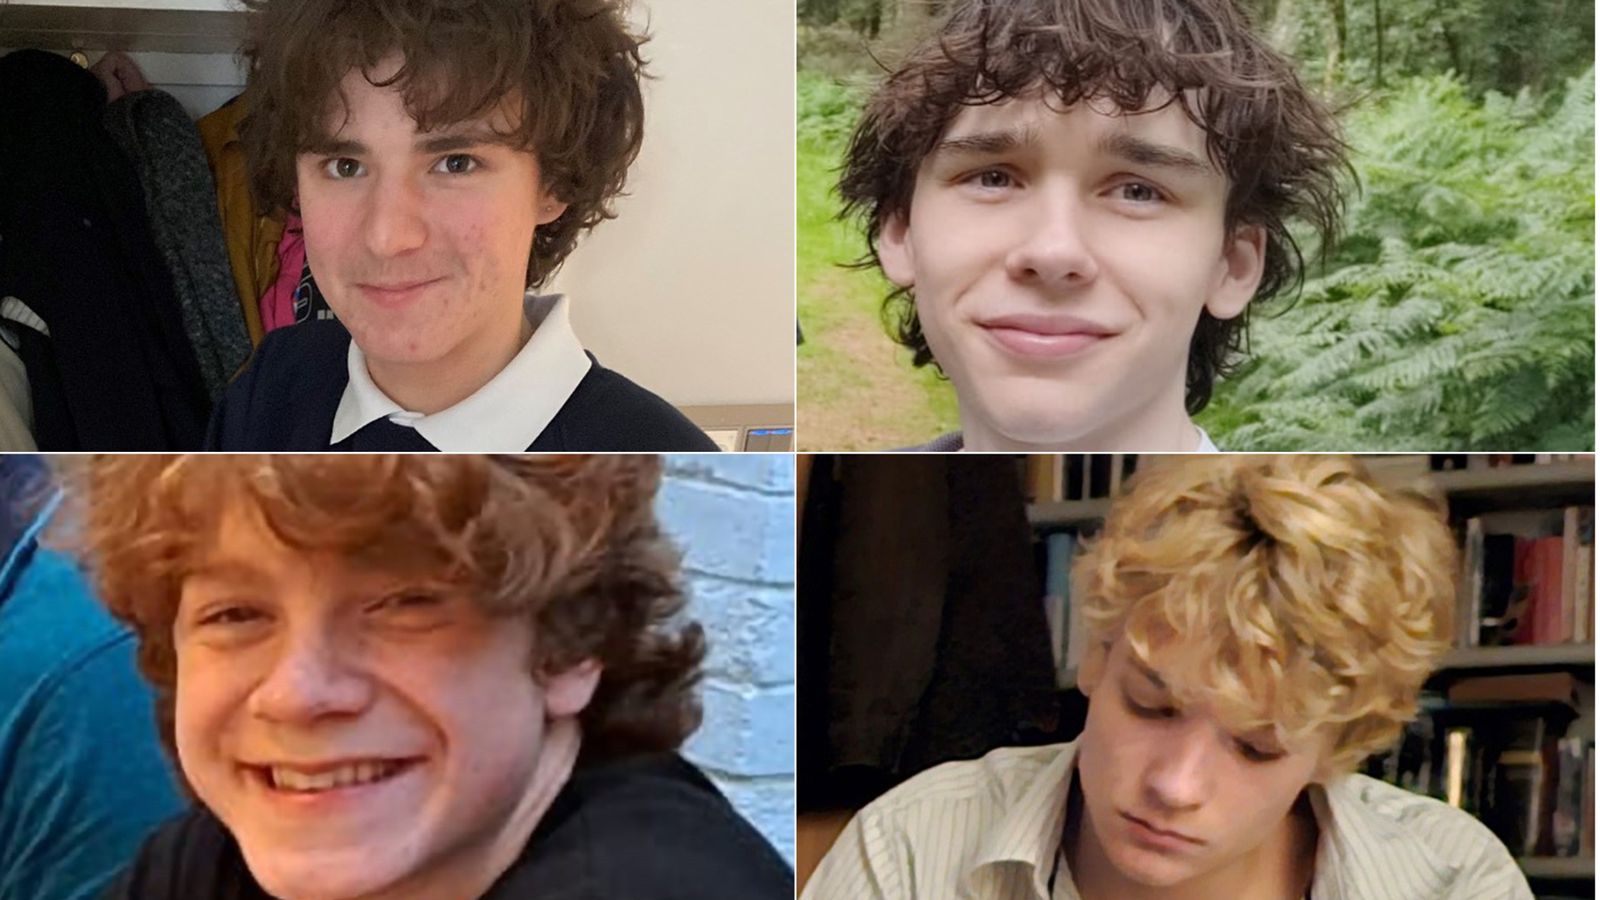 North Wales Police launch search and issue appeal to find four teenagers missing in Gwynedd